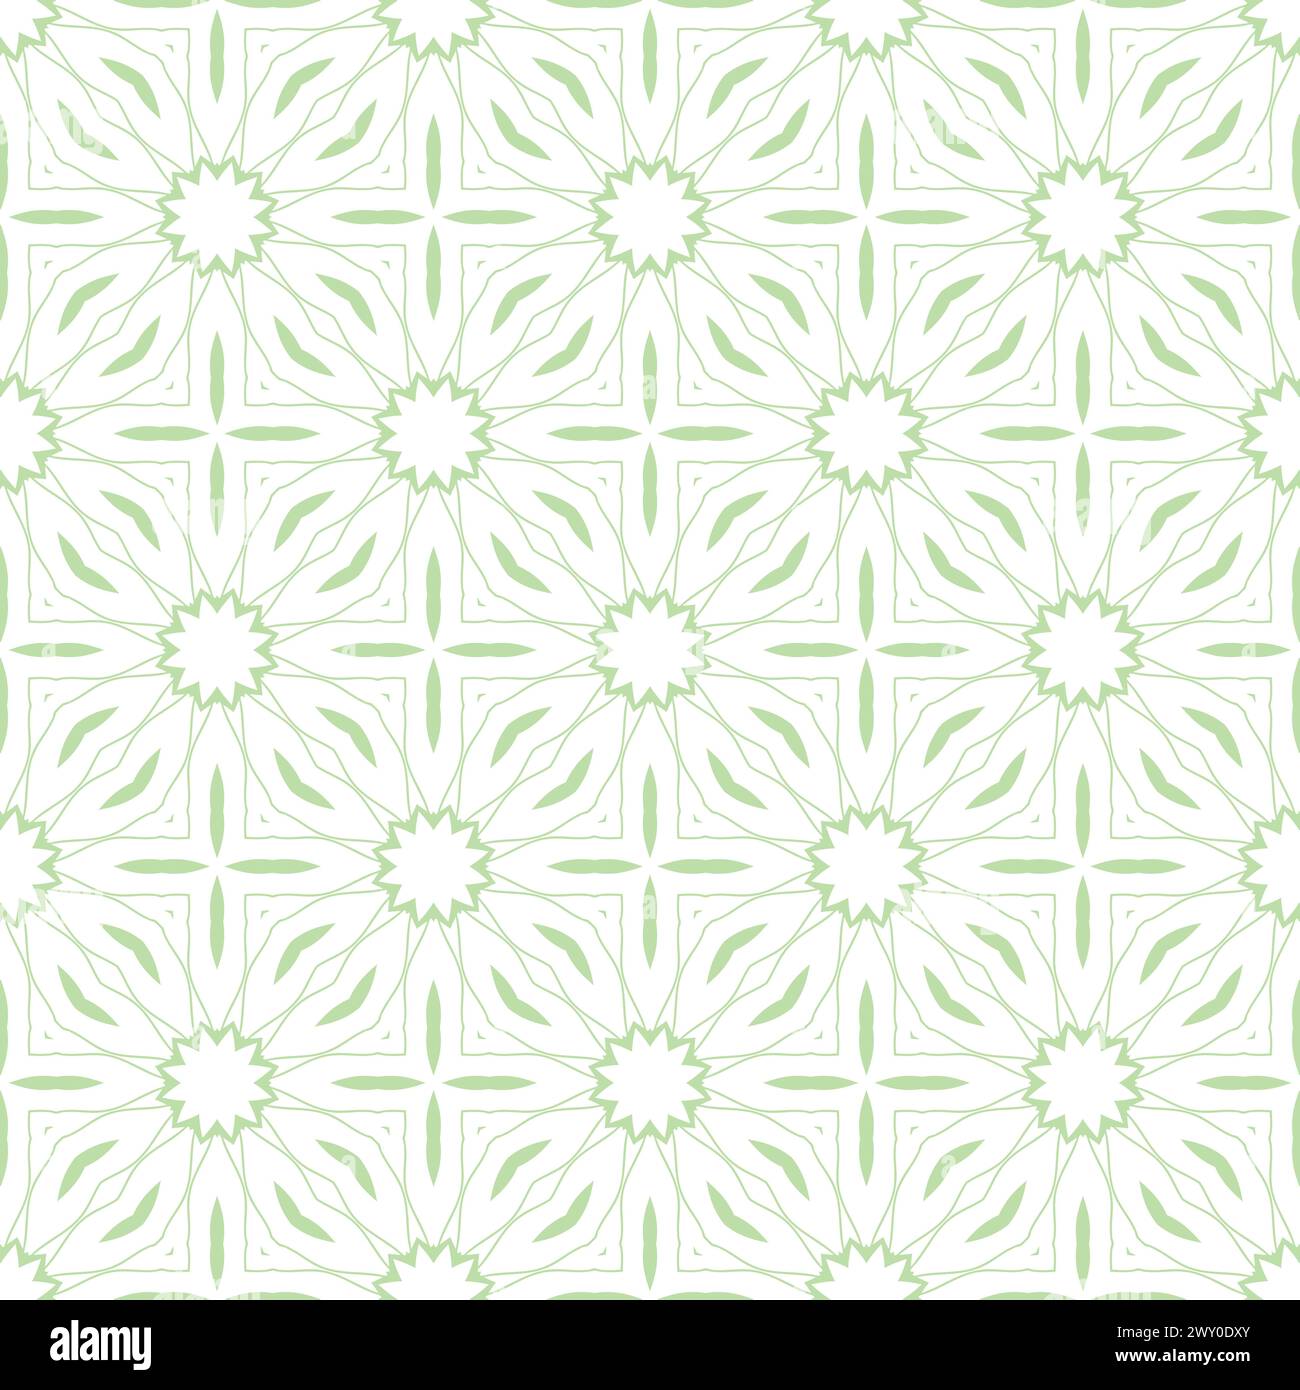 Abstract geometric green and white hipster fashion pillow pattern, green and white doodle fabric decor with exotic luxury forms Stock Photo